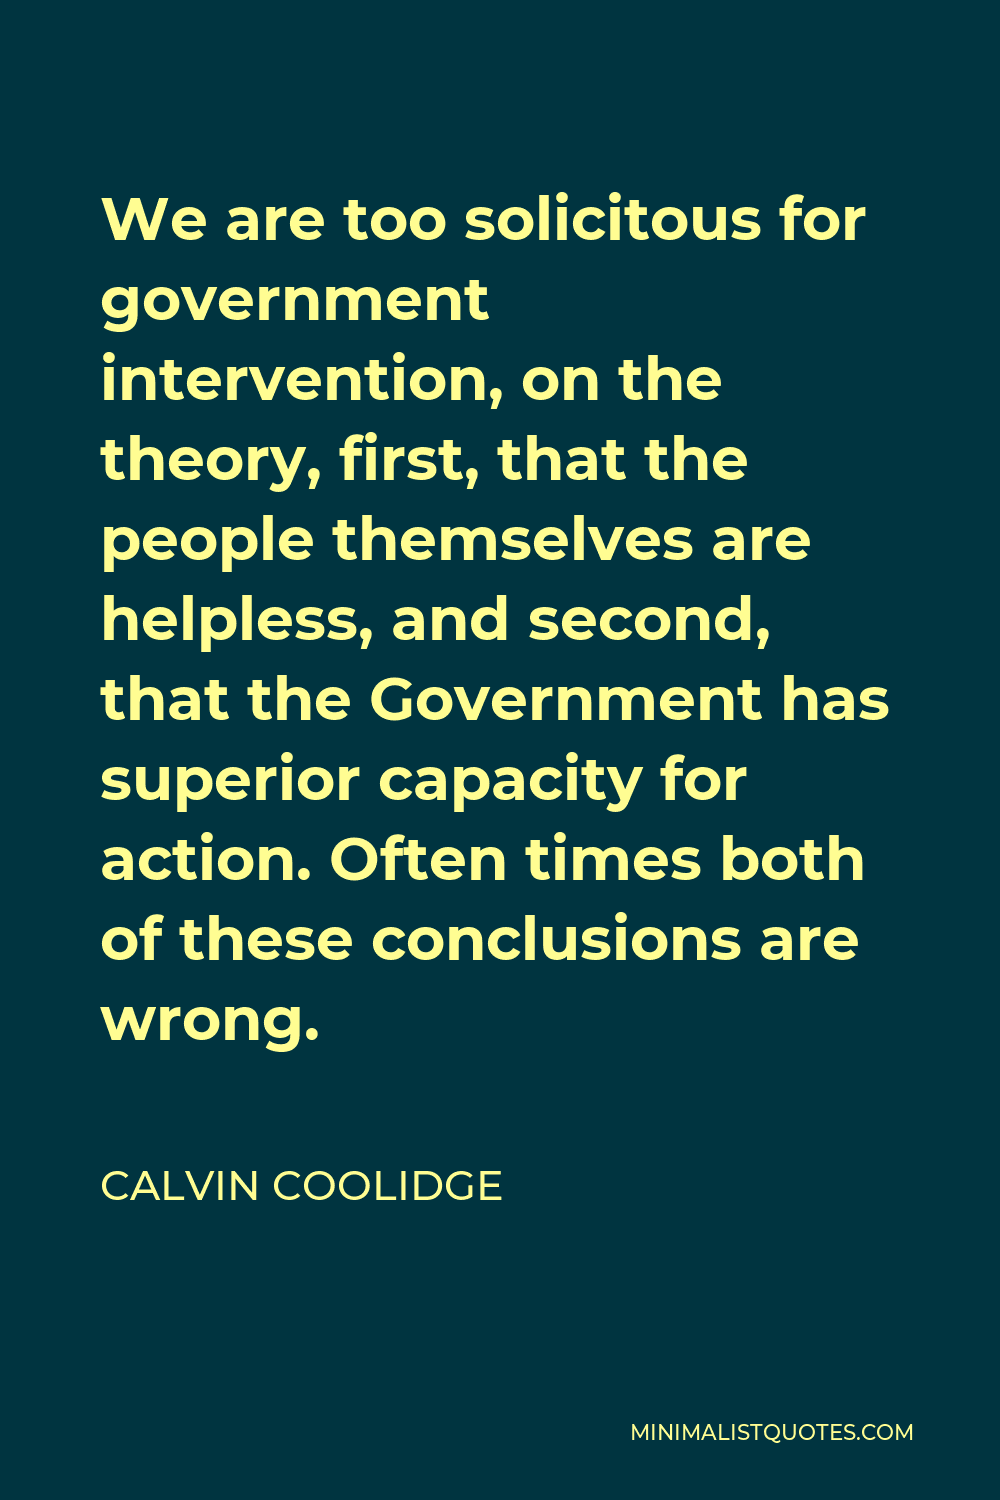 Calvin Coolidge Quote - We are too solicitous for government intervention, on the theory, first, that the people themselves are helpless, and second, that the Government has superior capacity for action. Often times both of these conclusions are wrong.